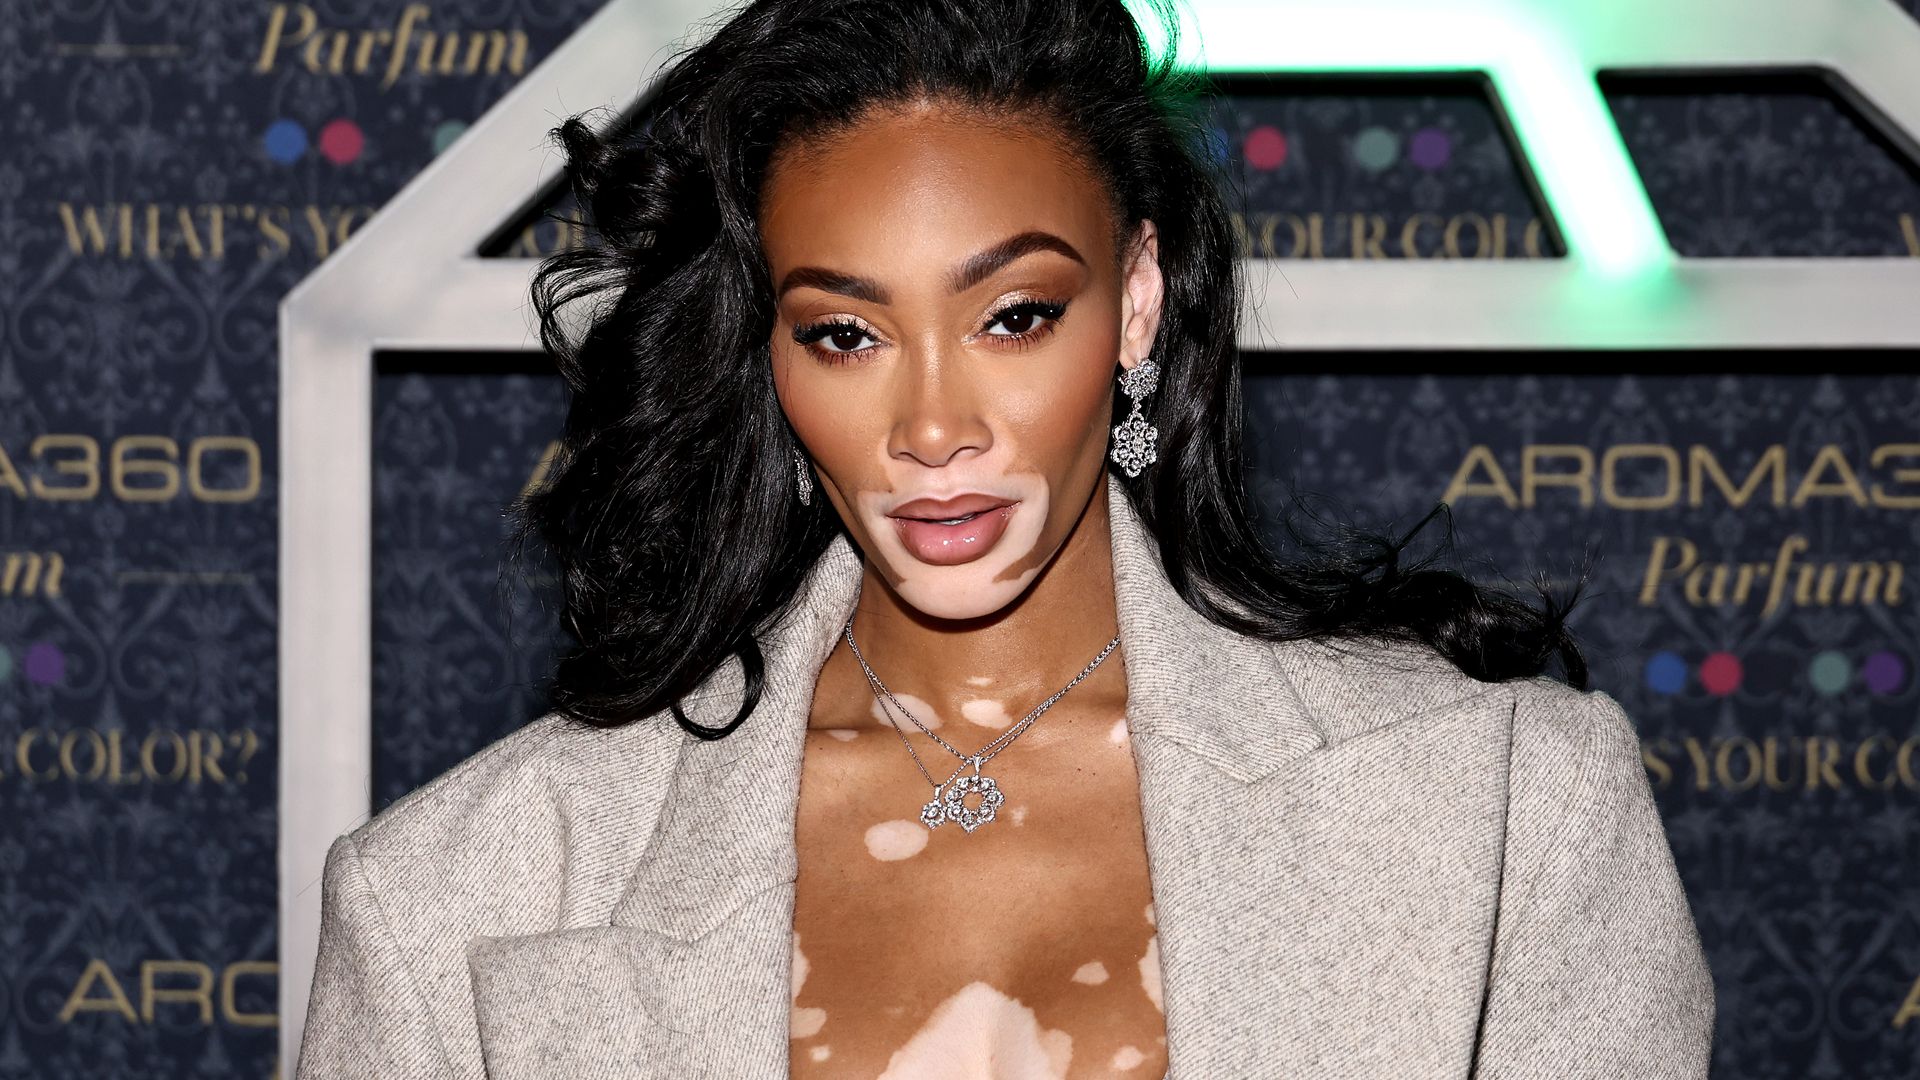 Winnie Harlow just stepped out in this season's hottest hair colour